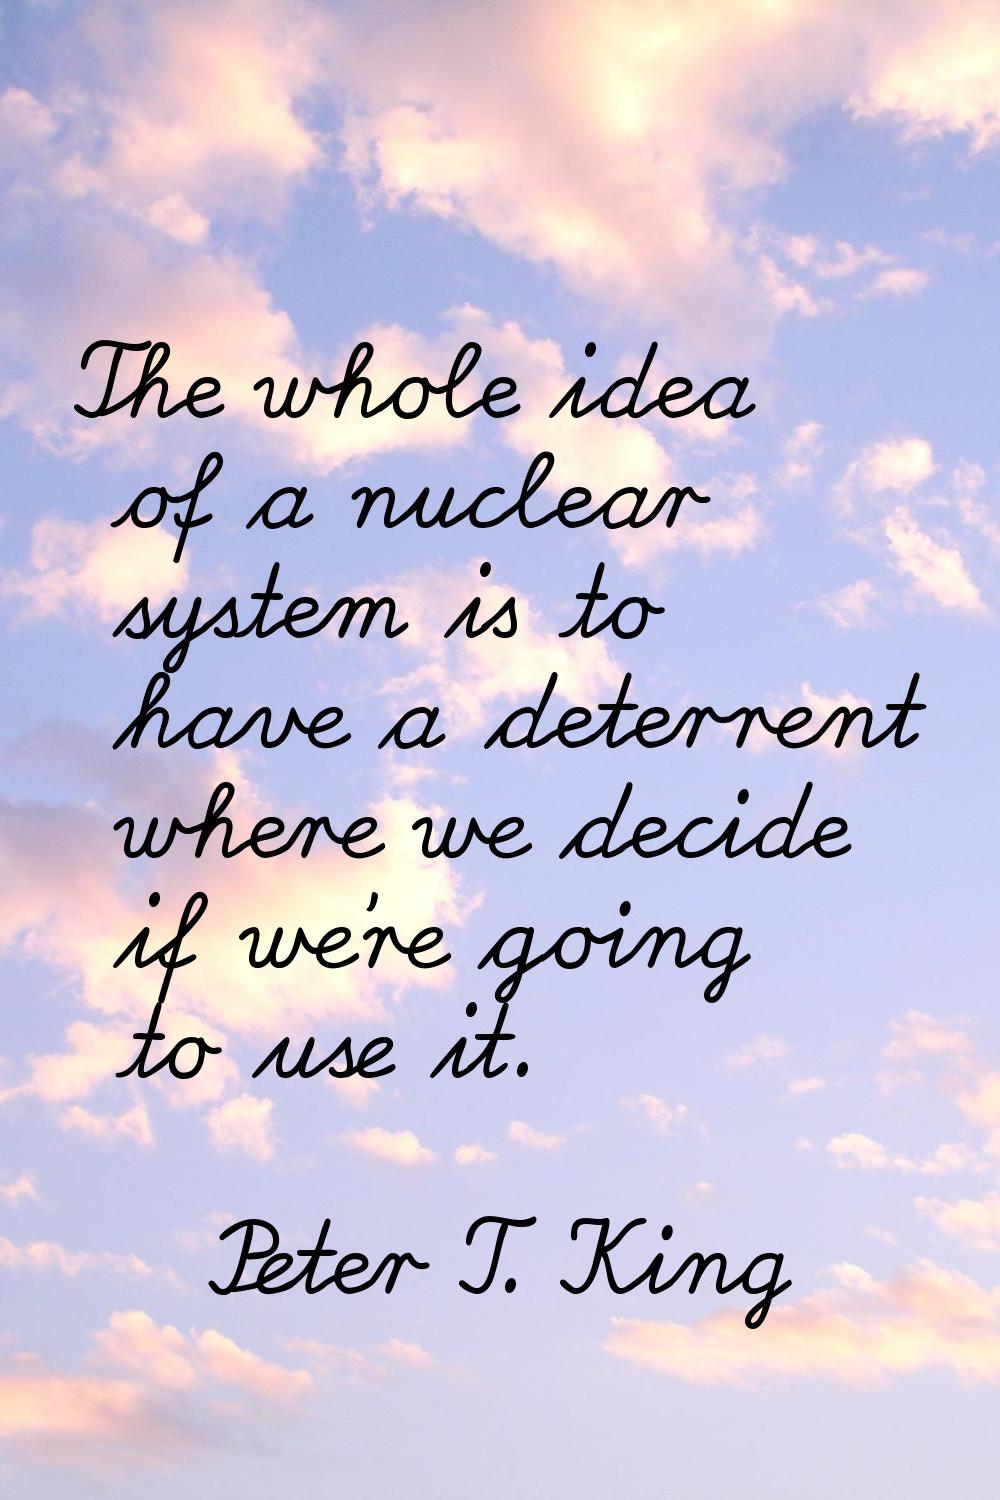 The whole idea of a nuclear system is to have a deterrent where we decide if we're going to use it.